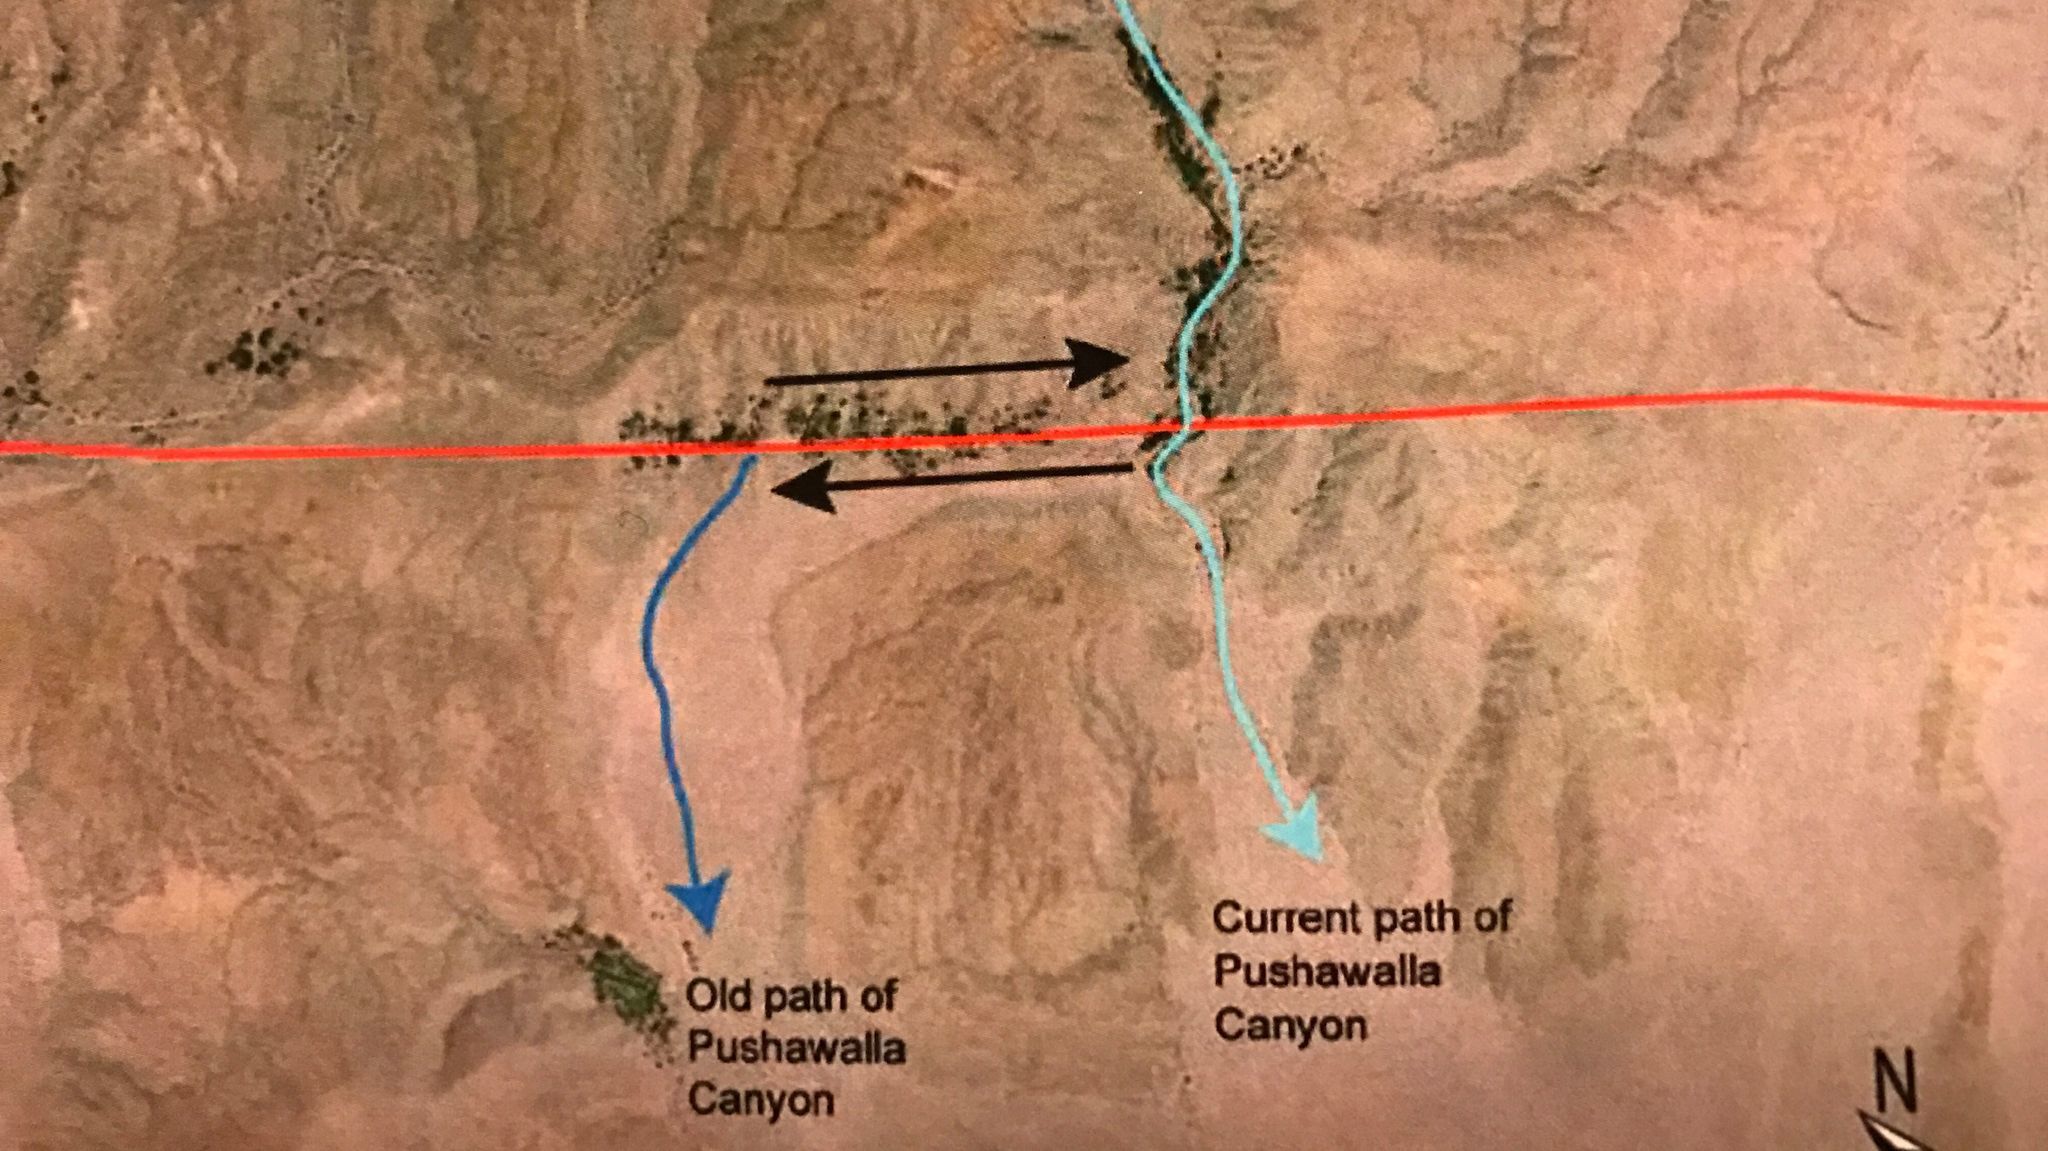 The old path of the Pushawalla Canyon was carved into Earth 32,000 years ago, according to U.S. Geological Survey research geologist Kate Scharer. Since then, the lower part of the canyon has been moving left, to the northwest, and has moved half a mile so far.